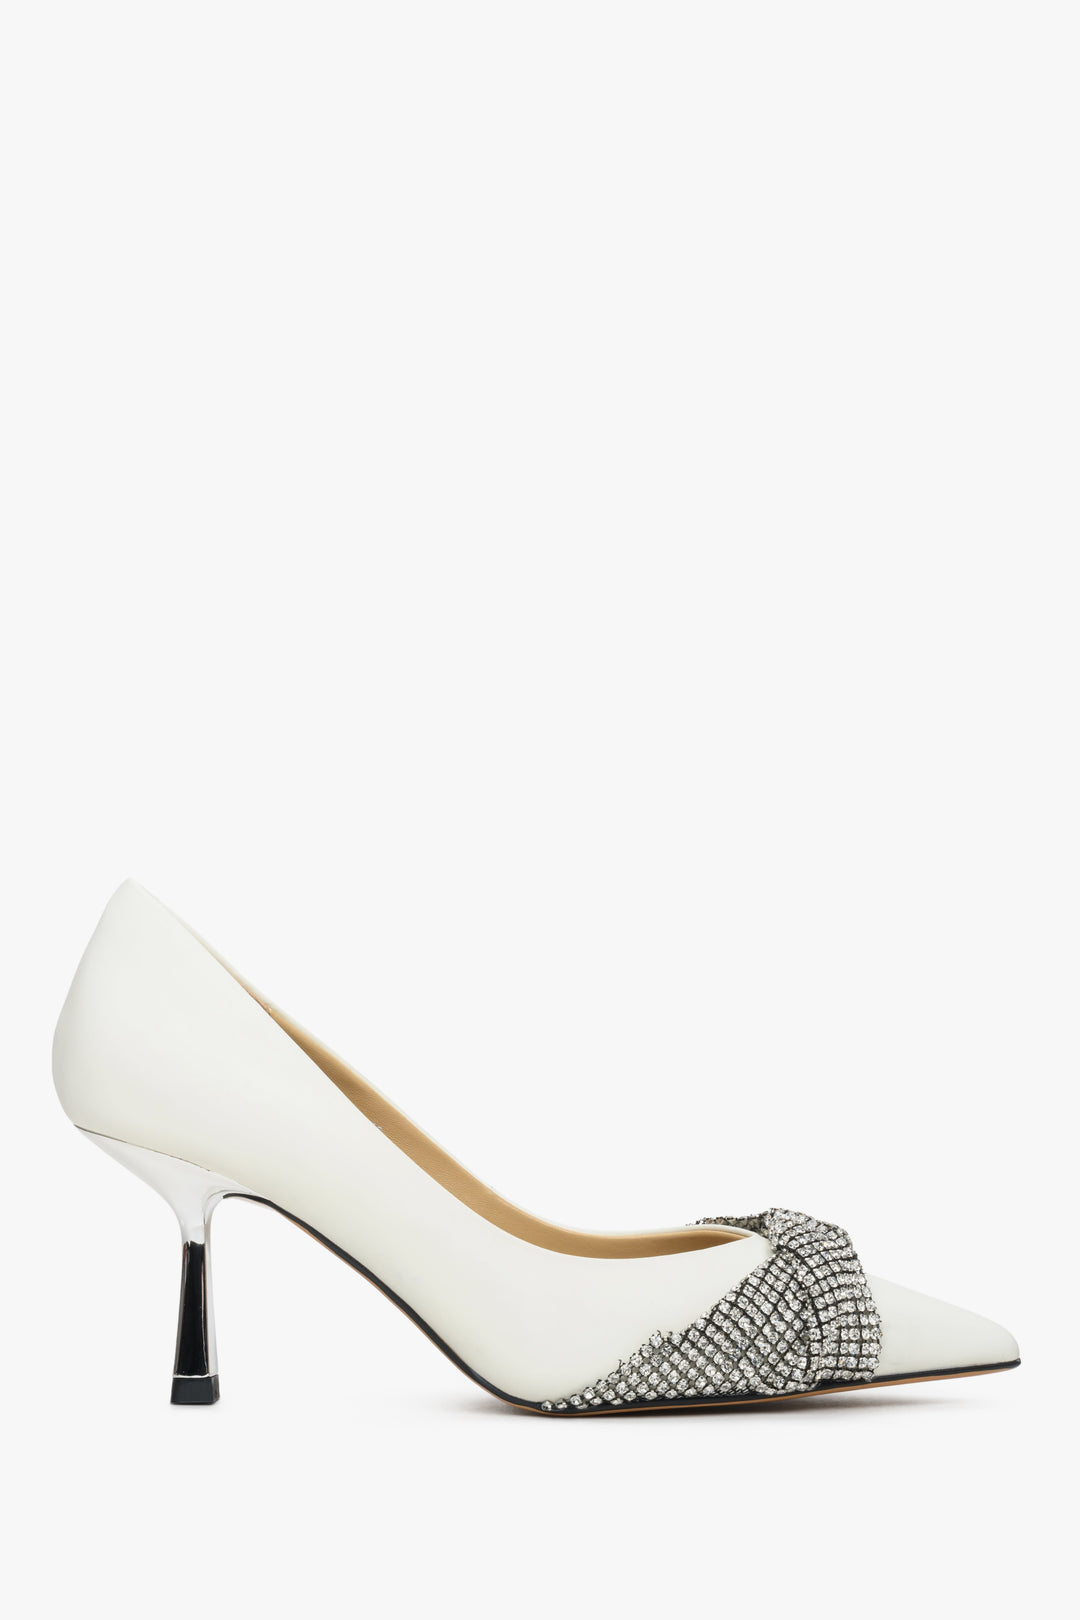 Women's white leather high heels with silver accents - shoe profile.